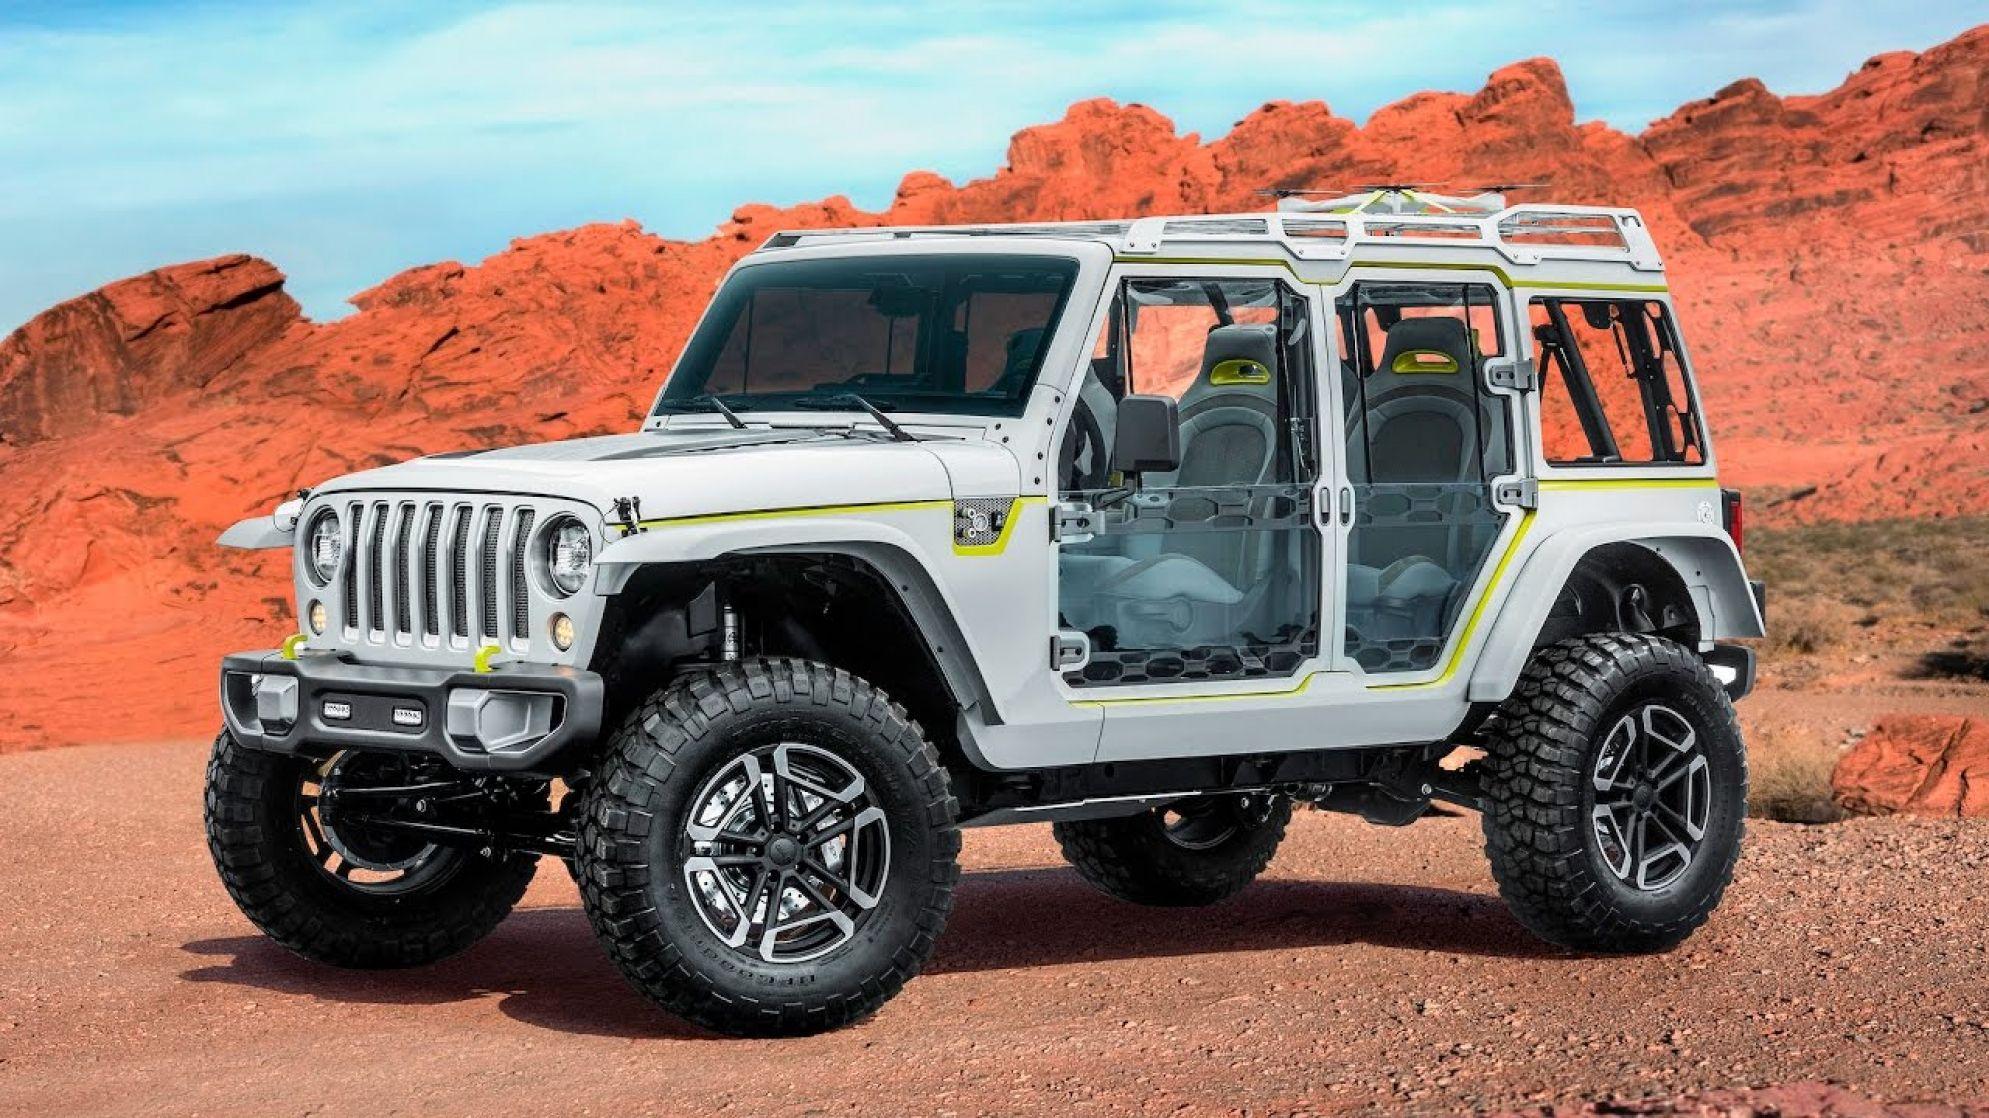 Jeep Wrangler Grille Android Wallpaper. HD Car Wallpaper